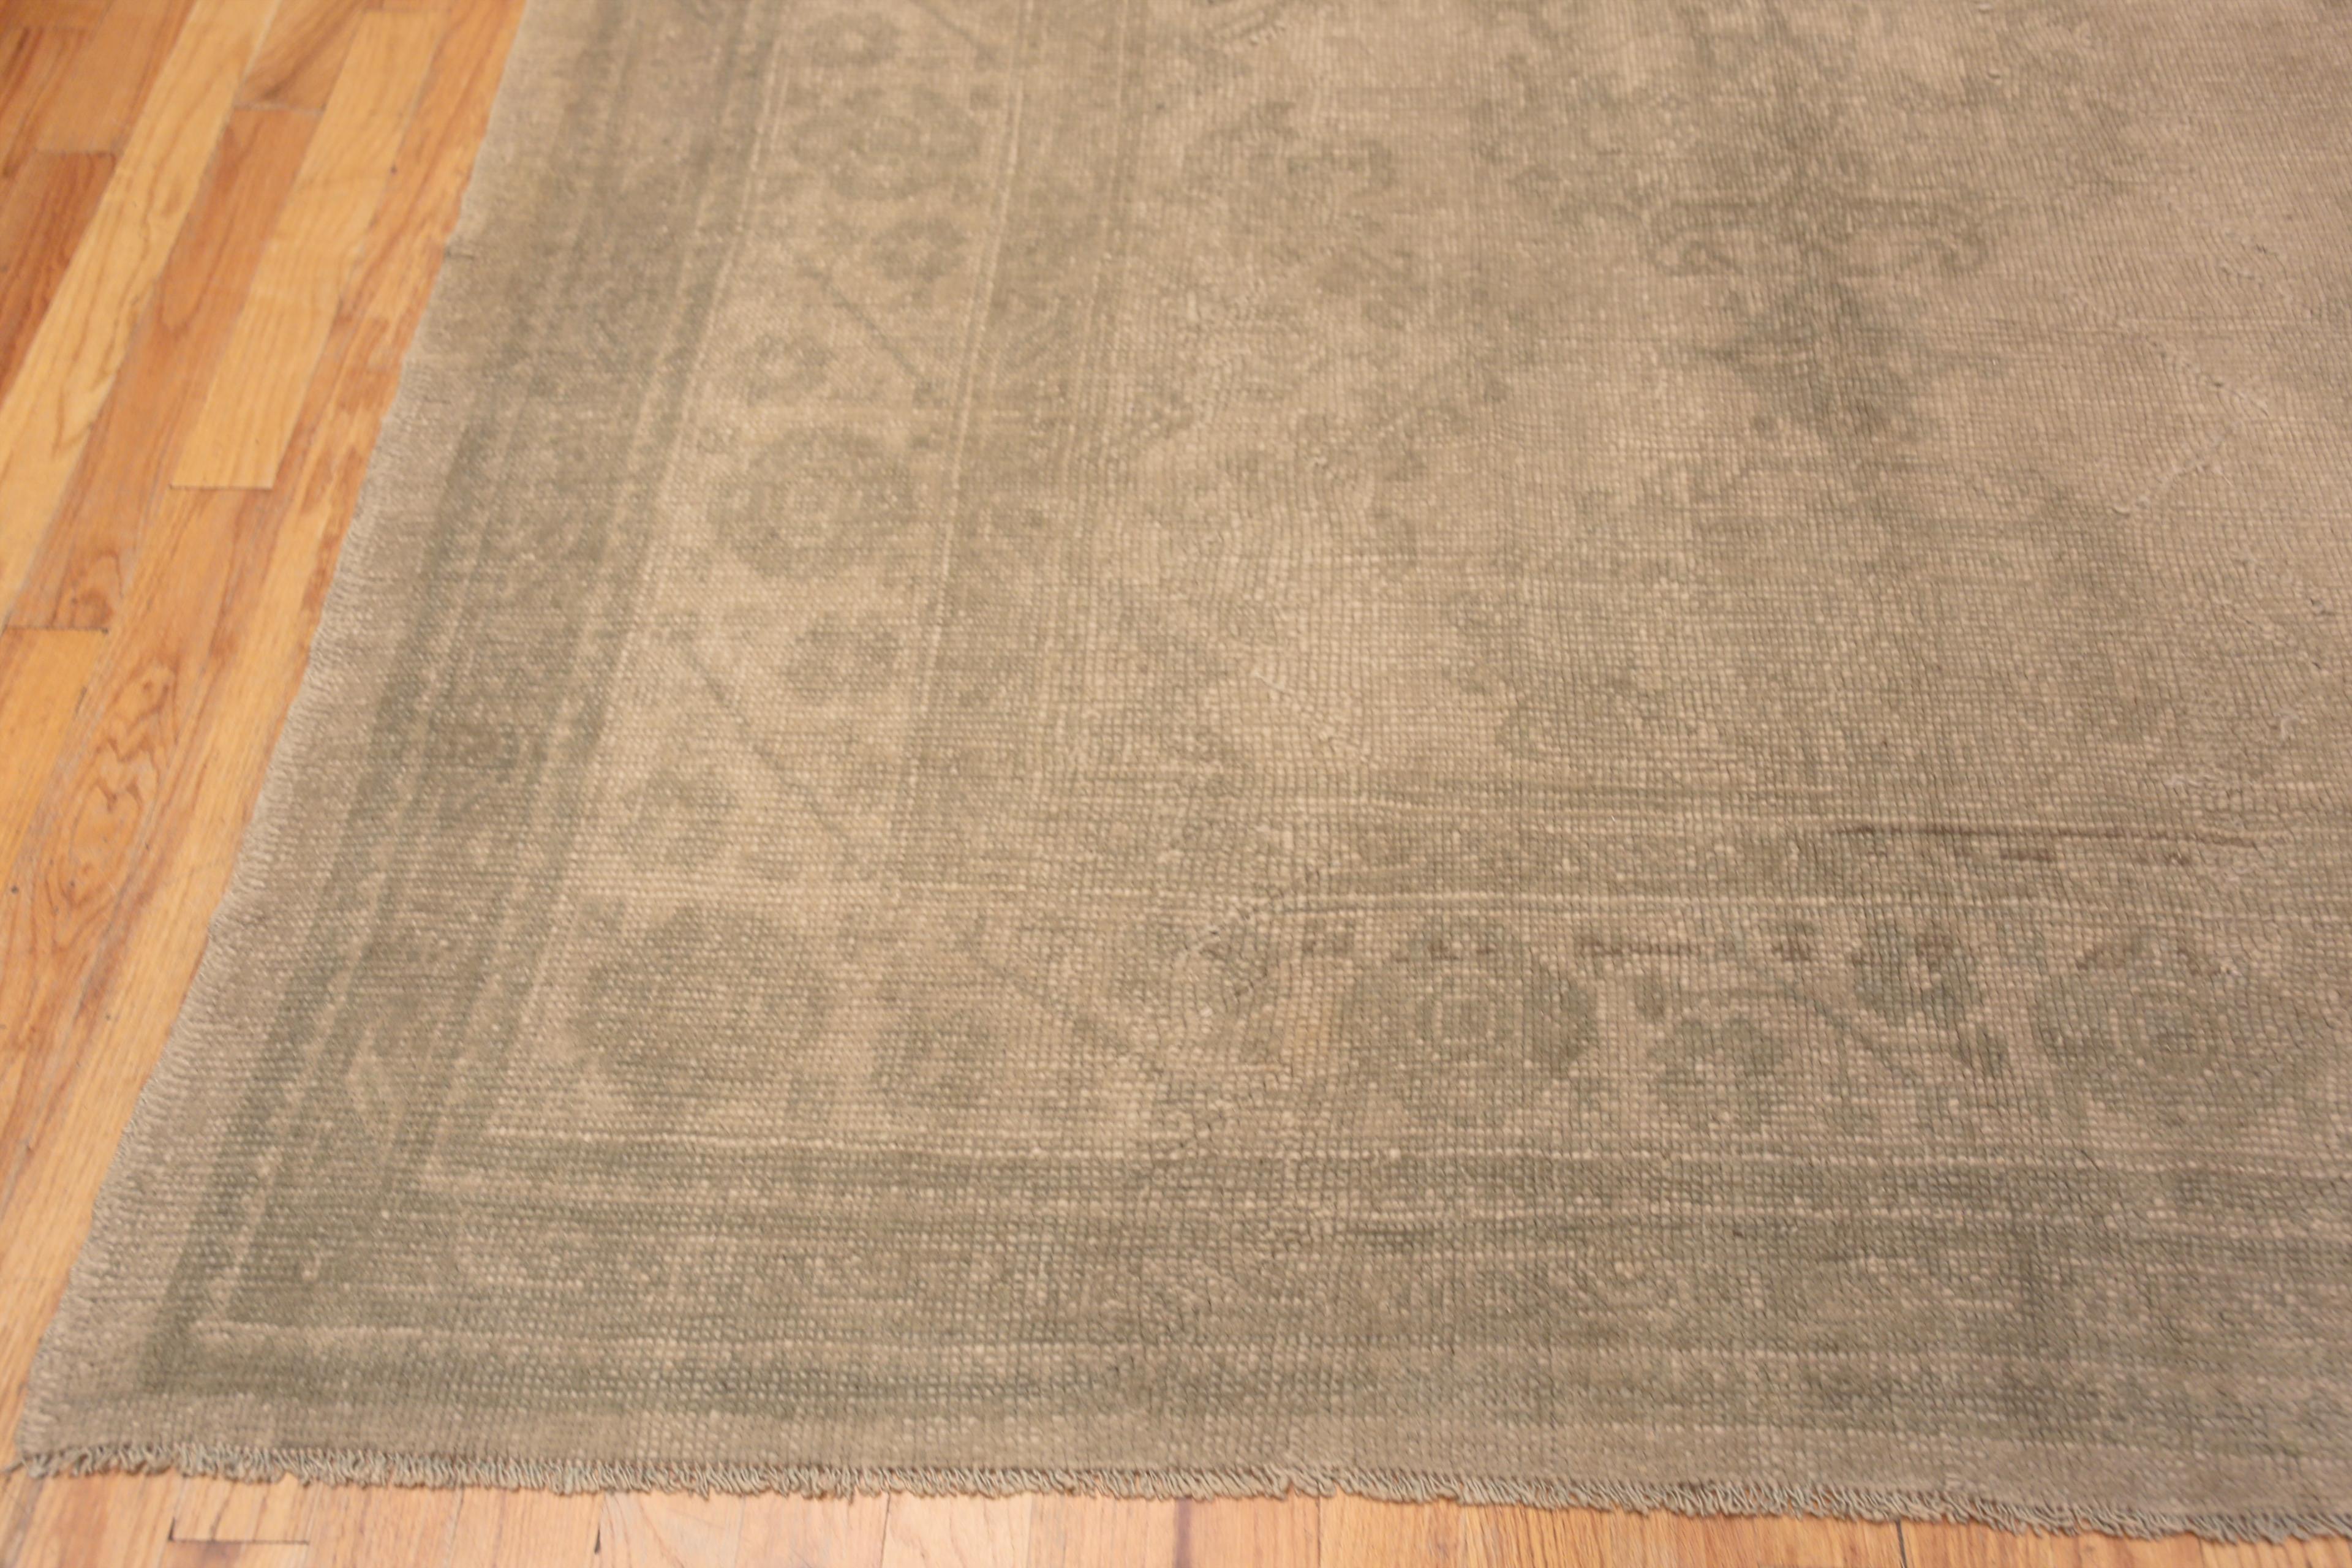 Soft and Decorative Large Size Light Grey Cream Color Tribal Design Antique Turkish Oushak Rug, Country of Origin / Rug Type: Antique Turkish Rug, Circa Date: 1920’s